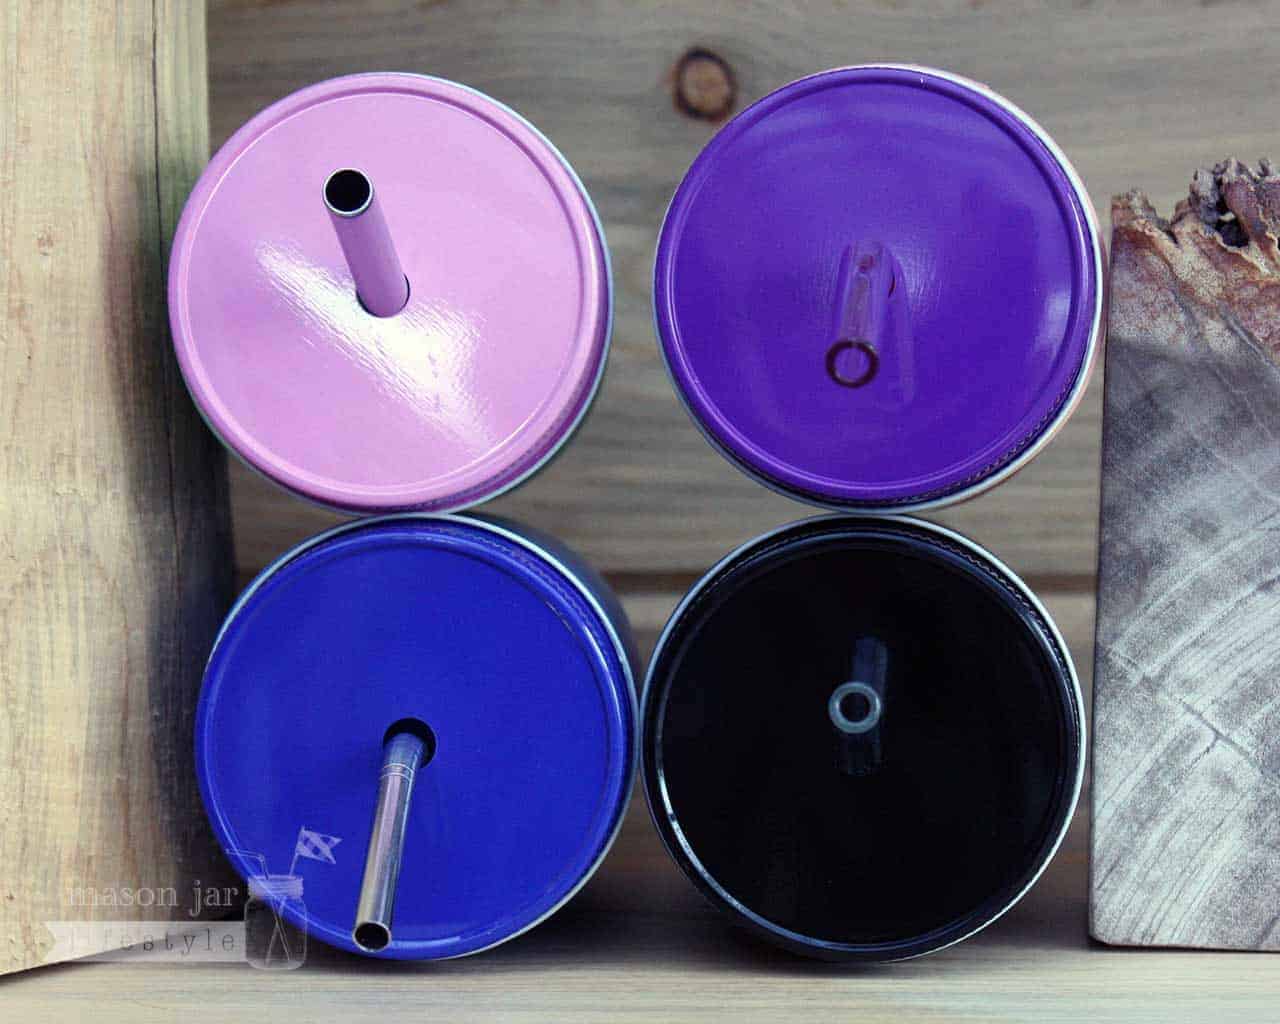 Solid color straw hole tumbler lids on regular mouth half pint Mason jars with reusable straws